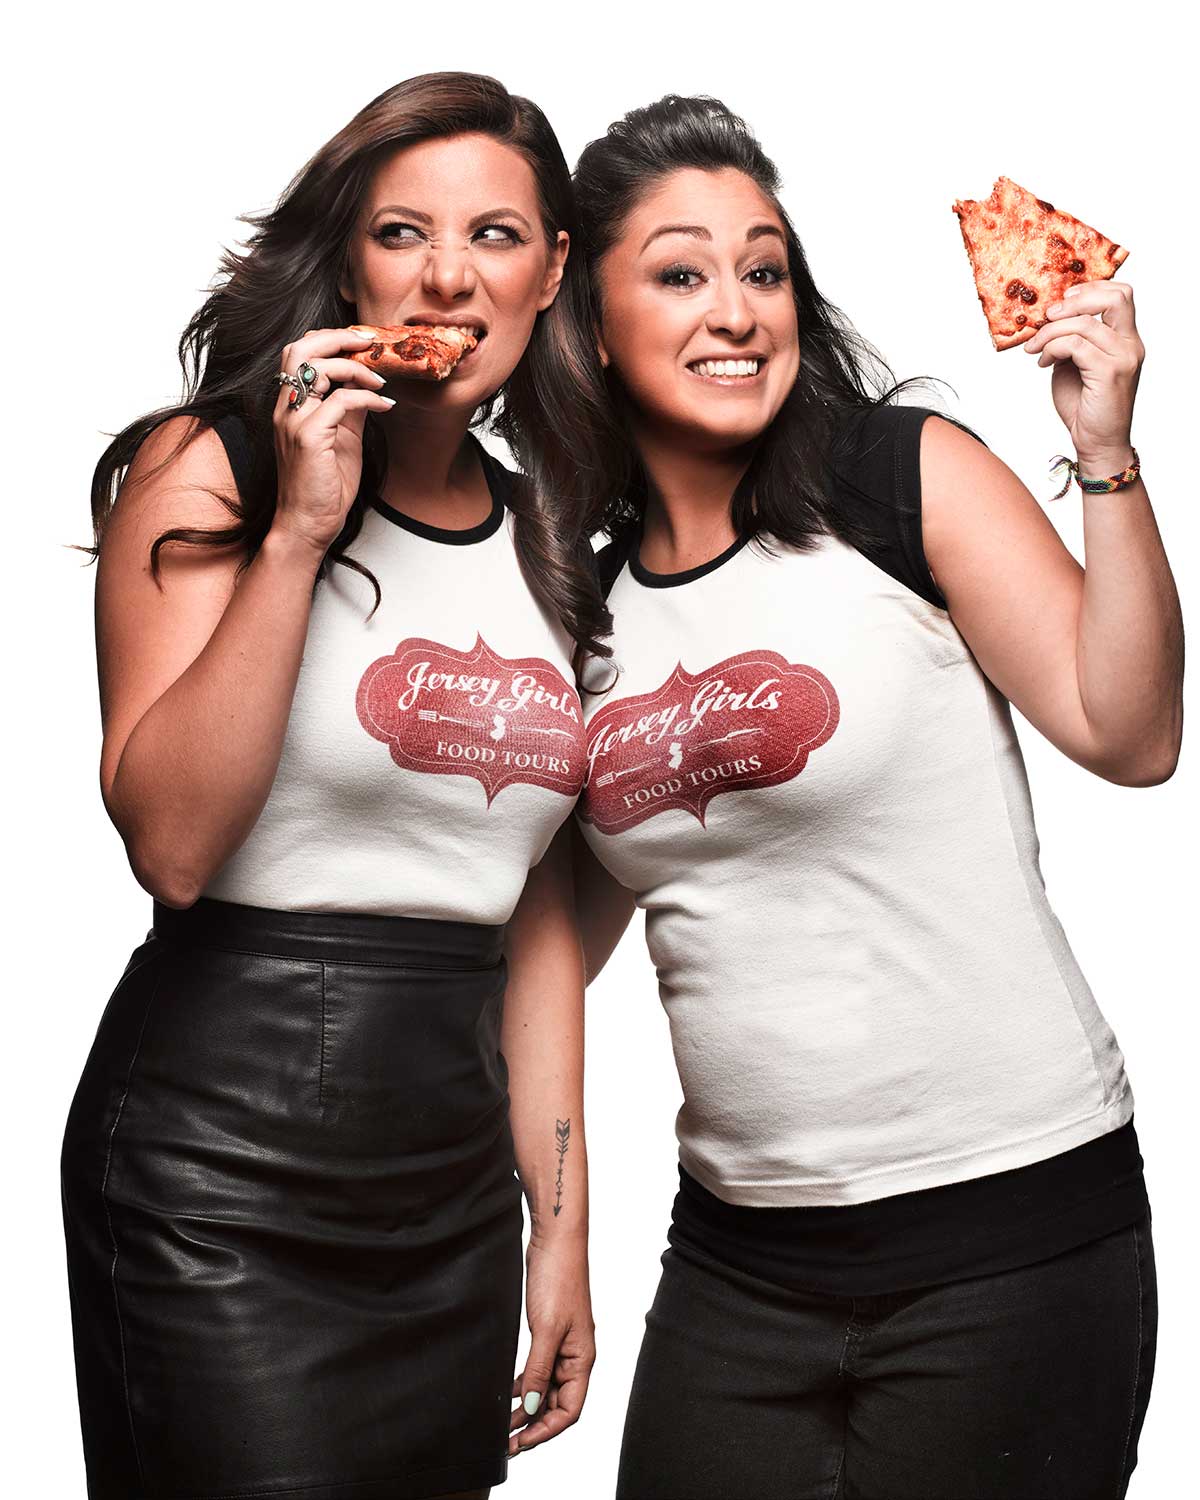 Jersey Girls Food Tours Founders